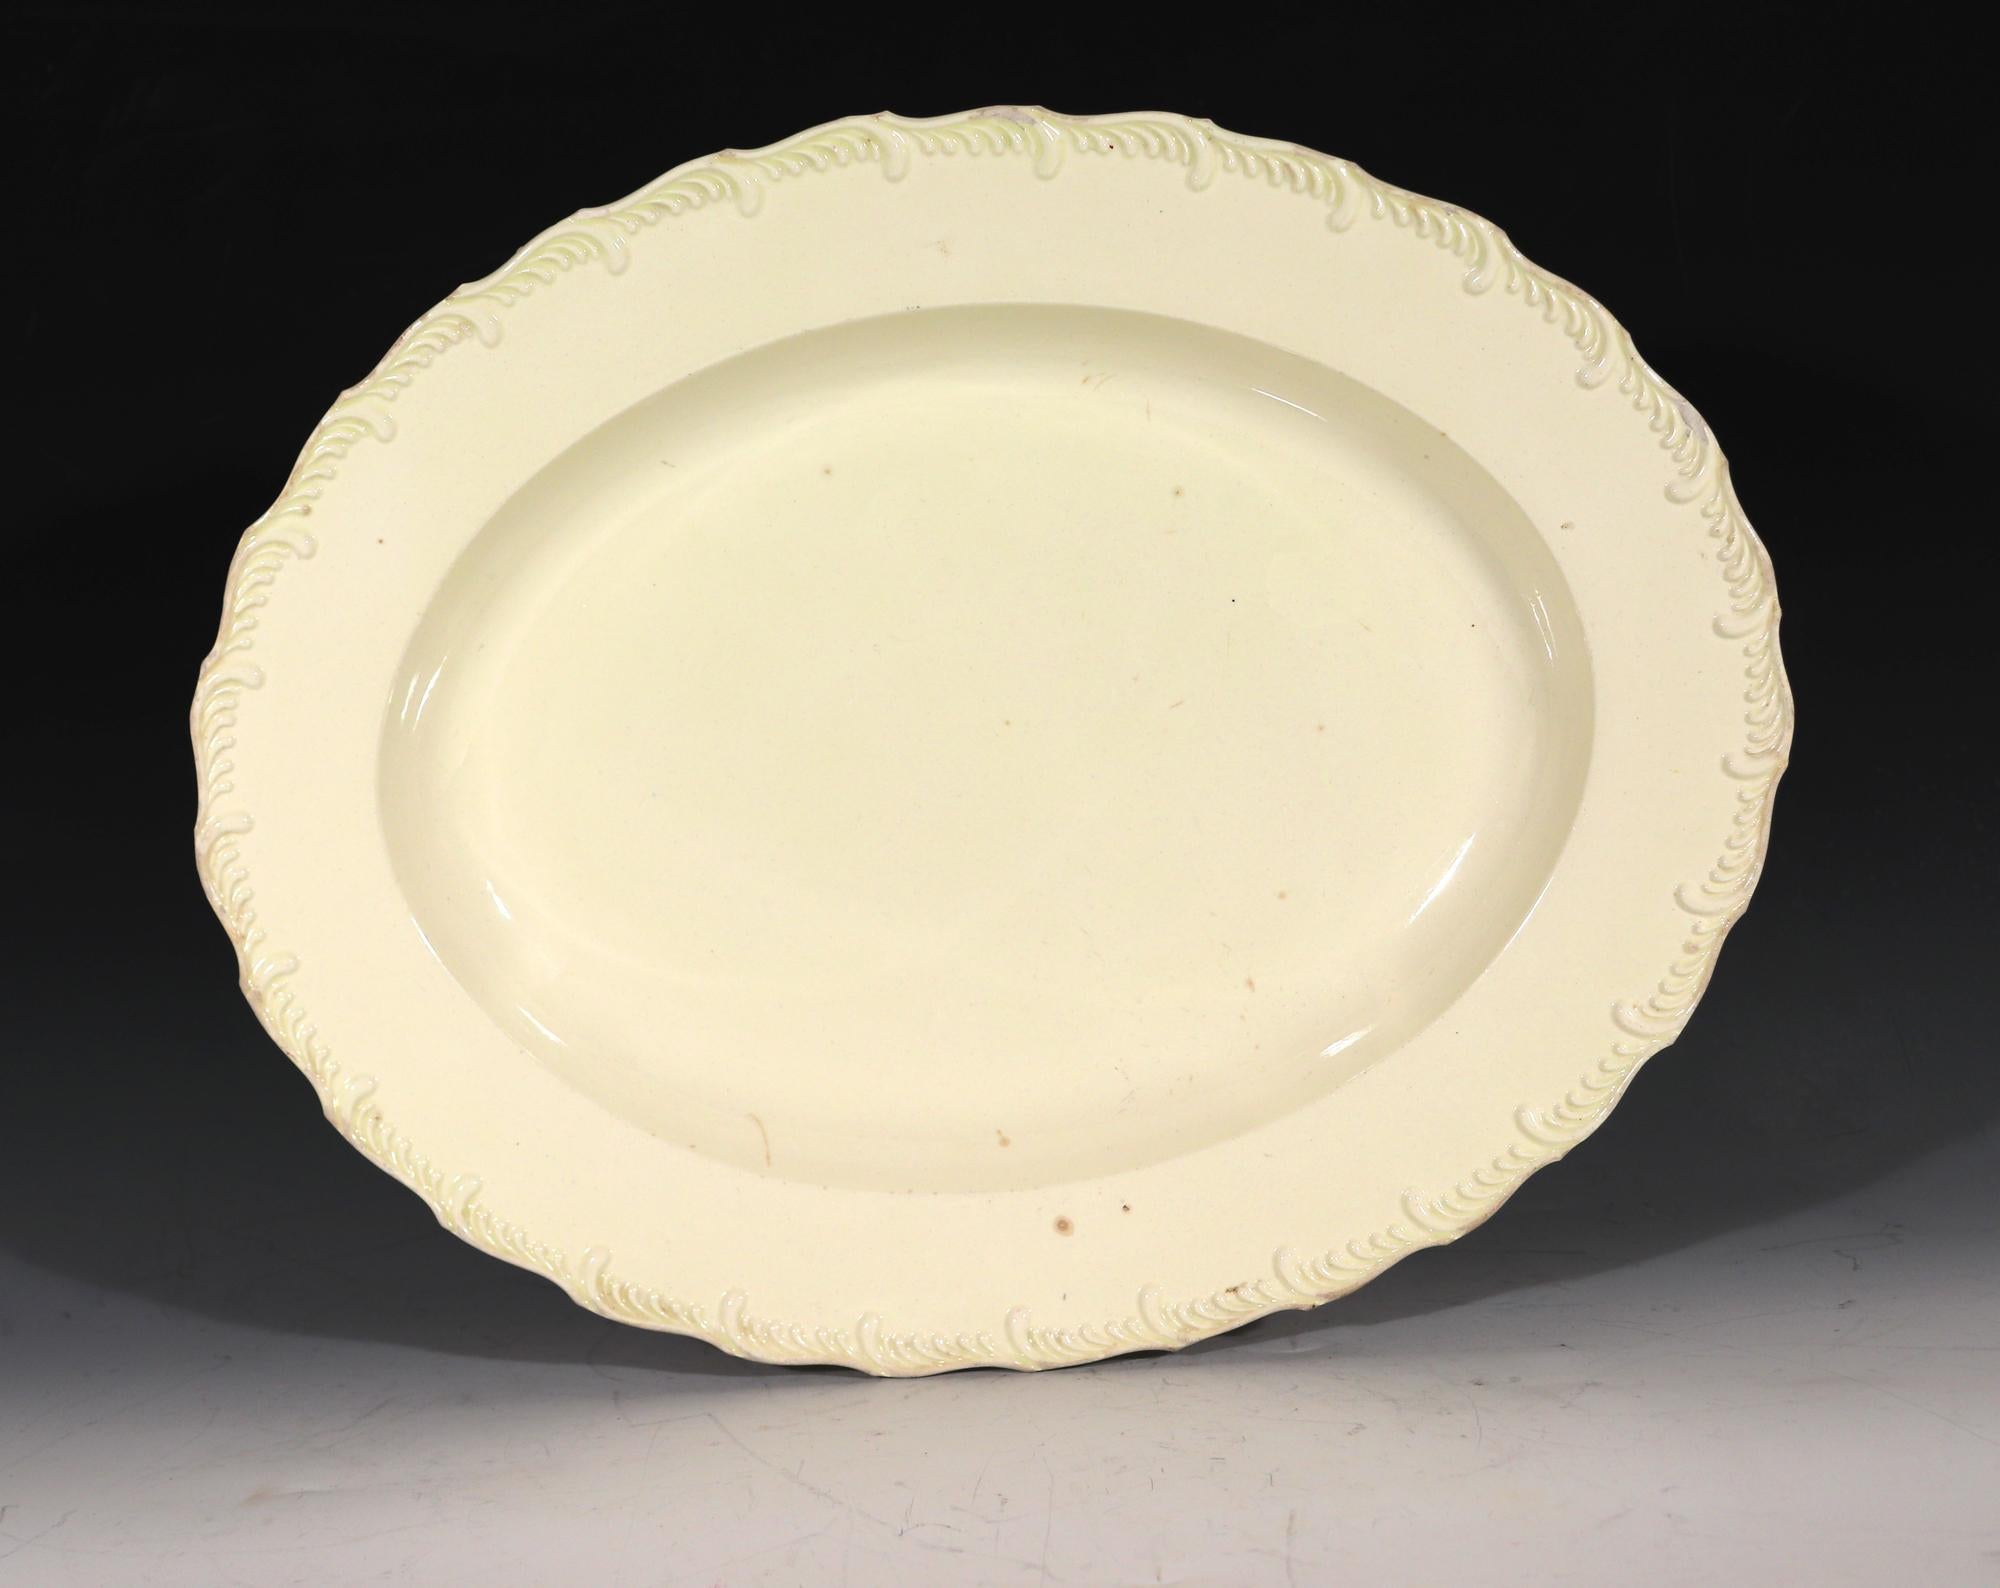 From a collection of creamware-
Antique Creamware Large Feather-edged Oval Dish,
1780-1800

The deep plain creamware oval dish has a moulded feather edge rim.

Dimensions: 14 inches x 11 inches x 1 3/4 inches high

In 1765, Wedgewood